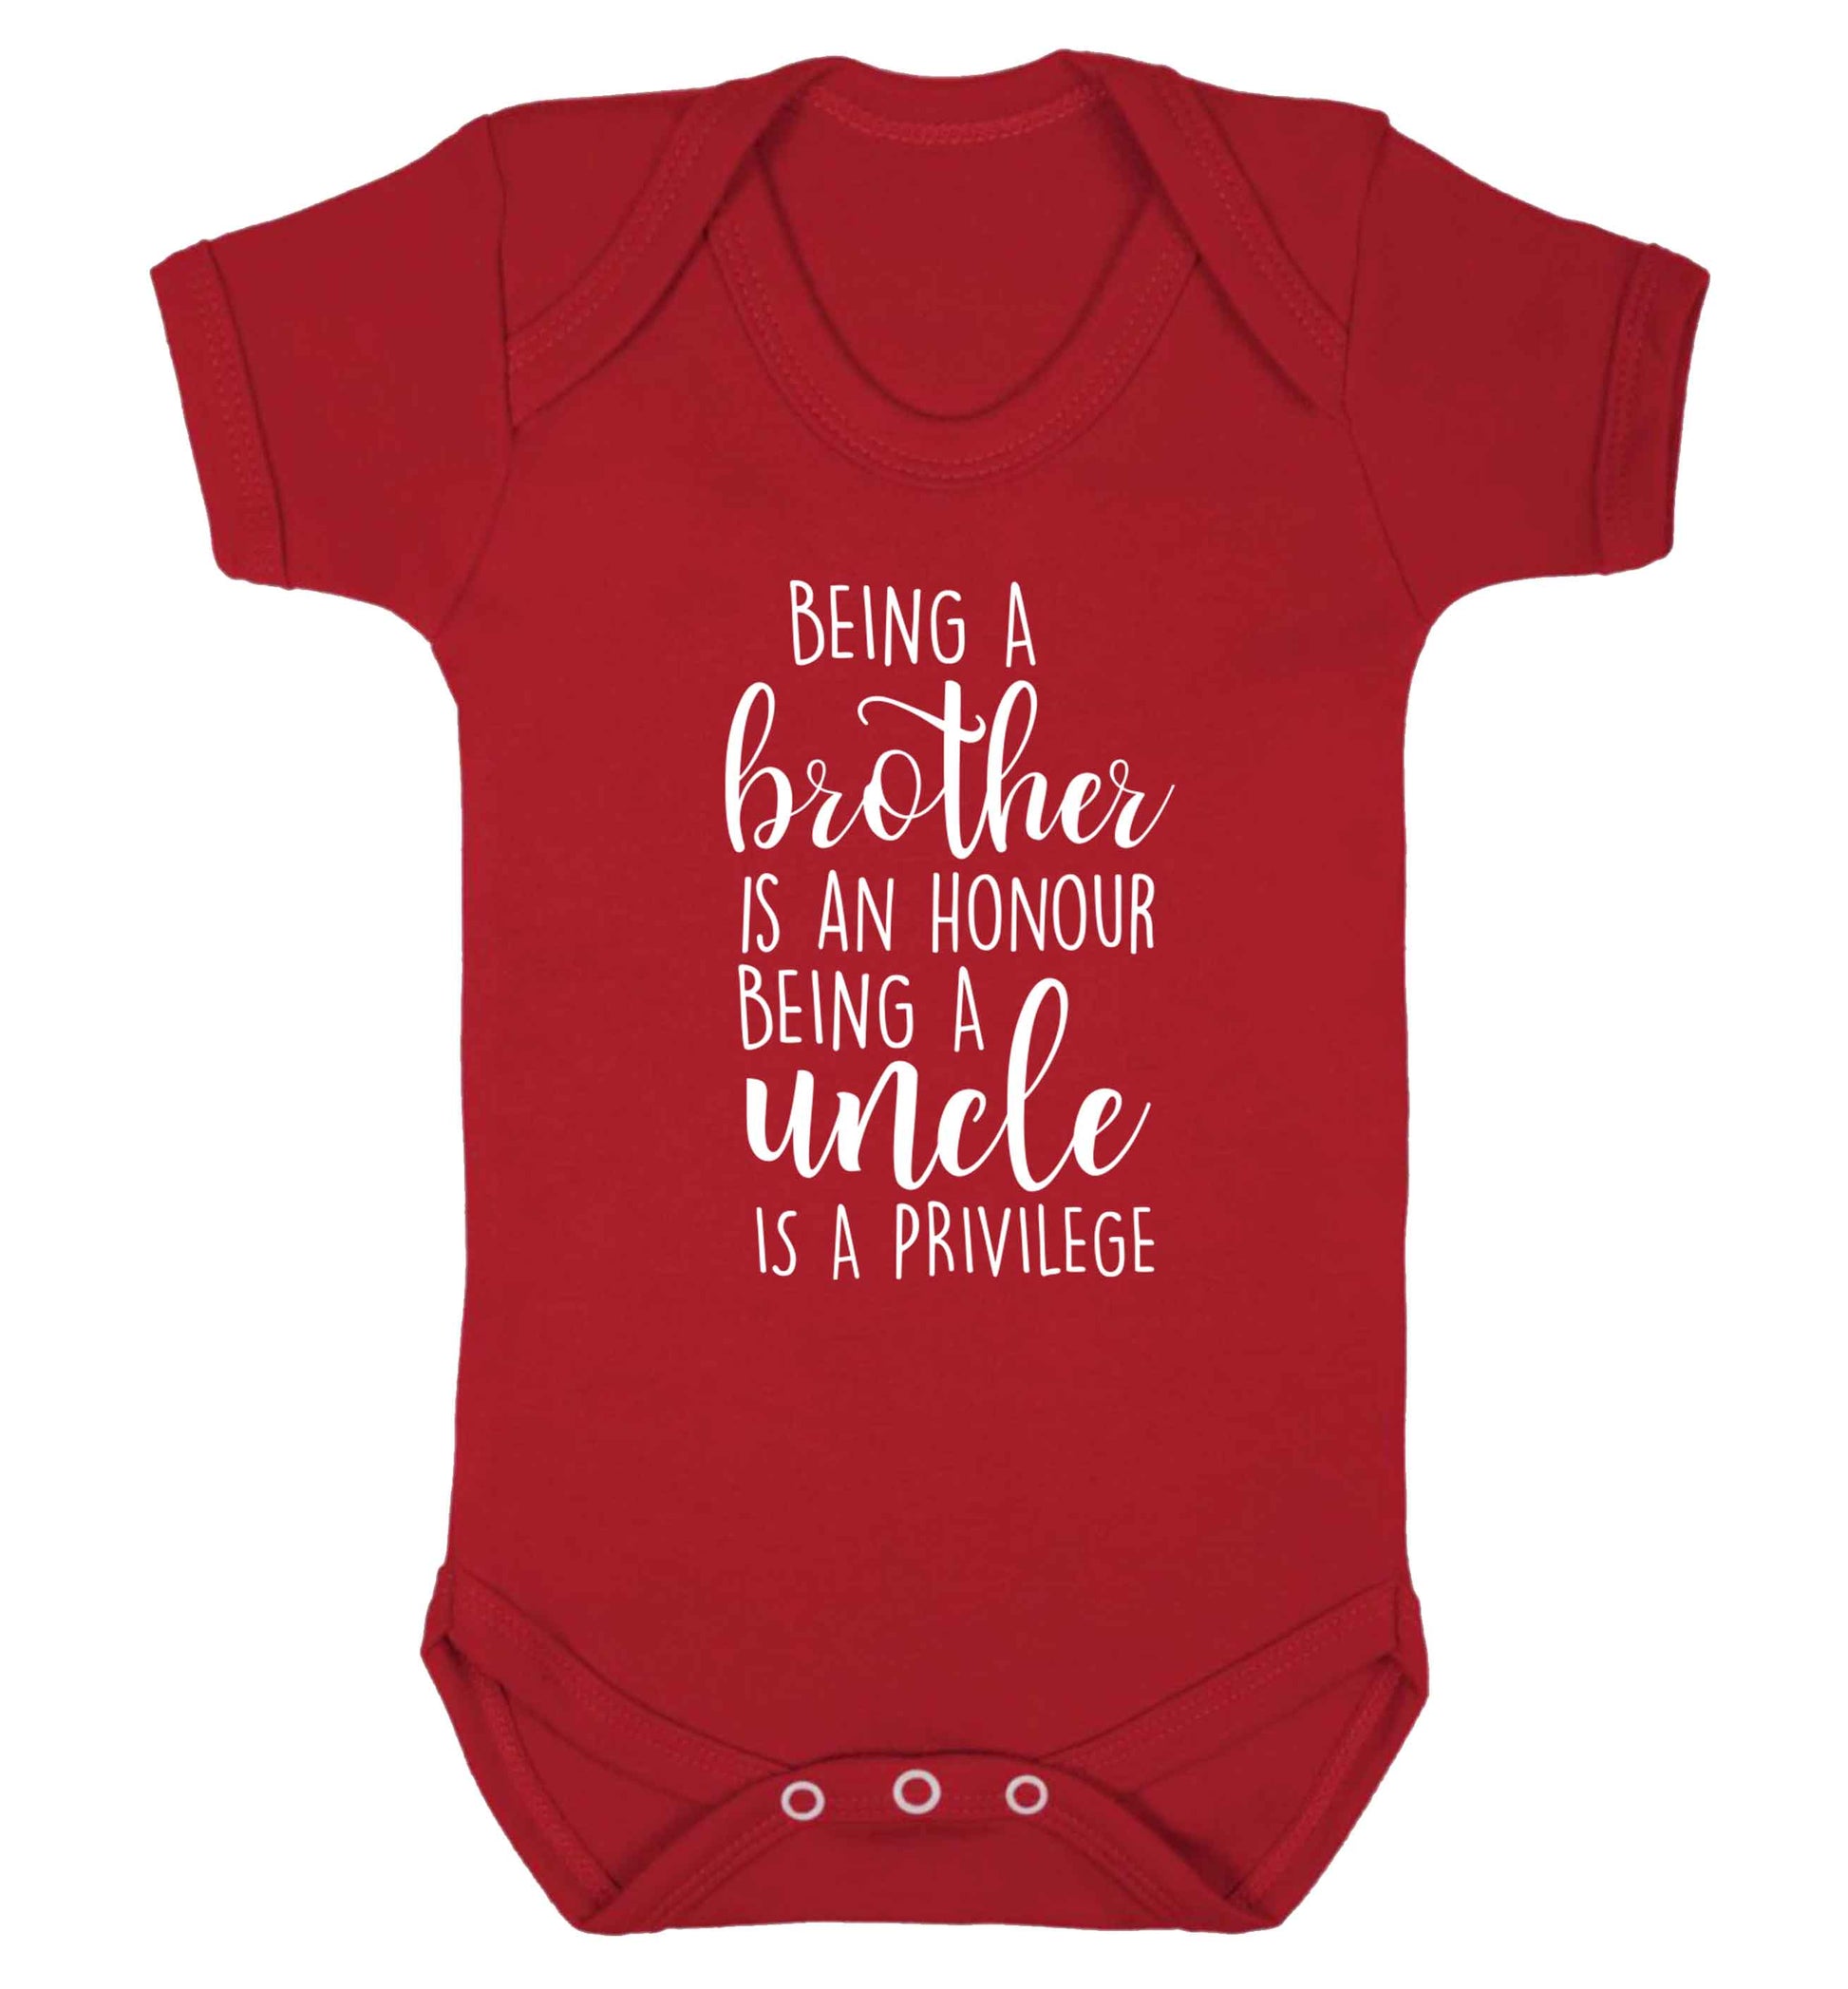 Being a brother is an honour being an uncle is a privilege Baby Vest red 18-24 months